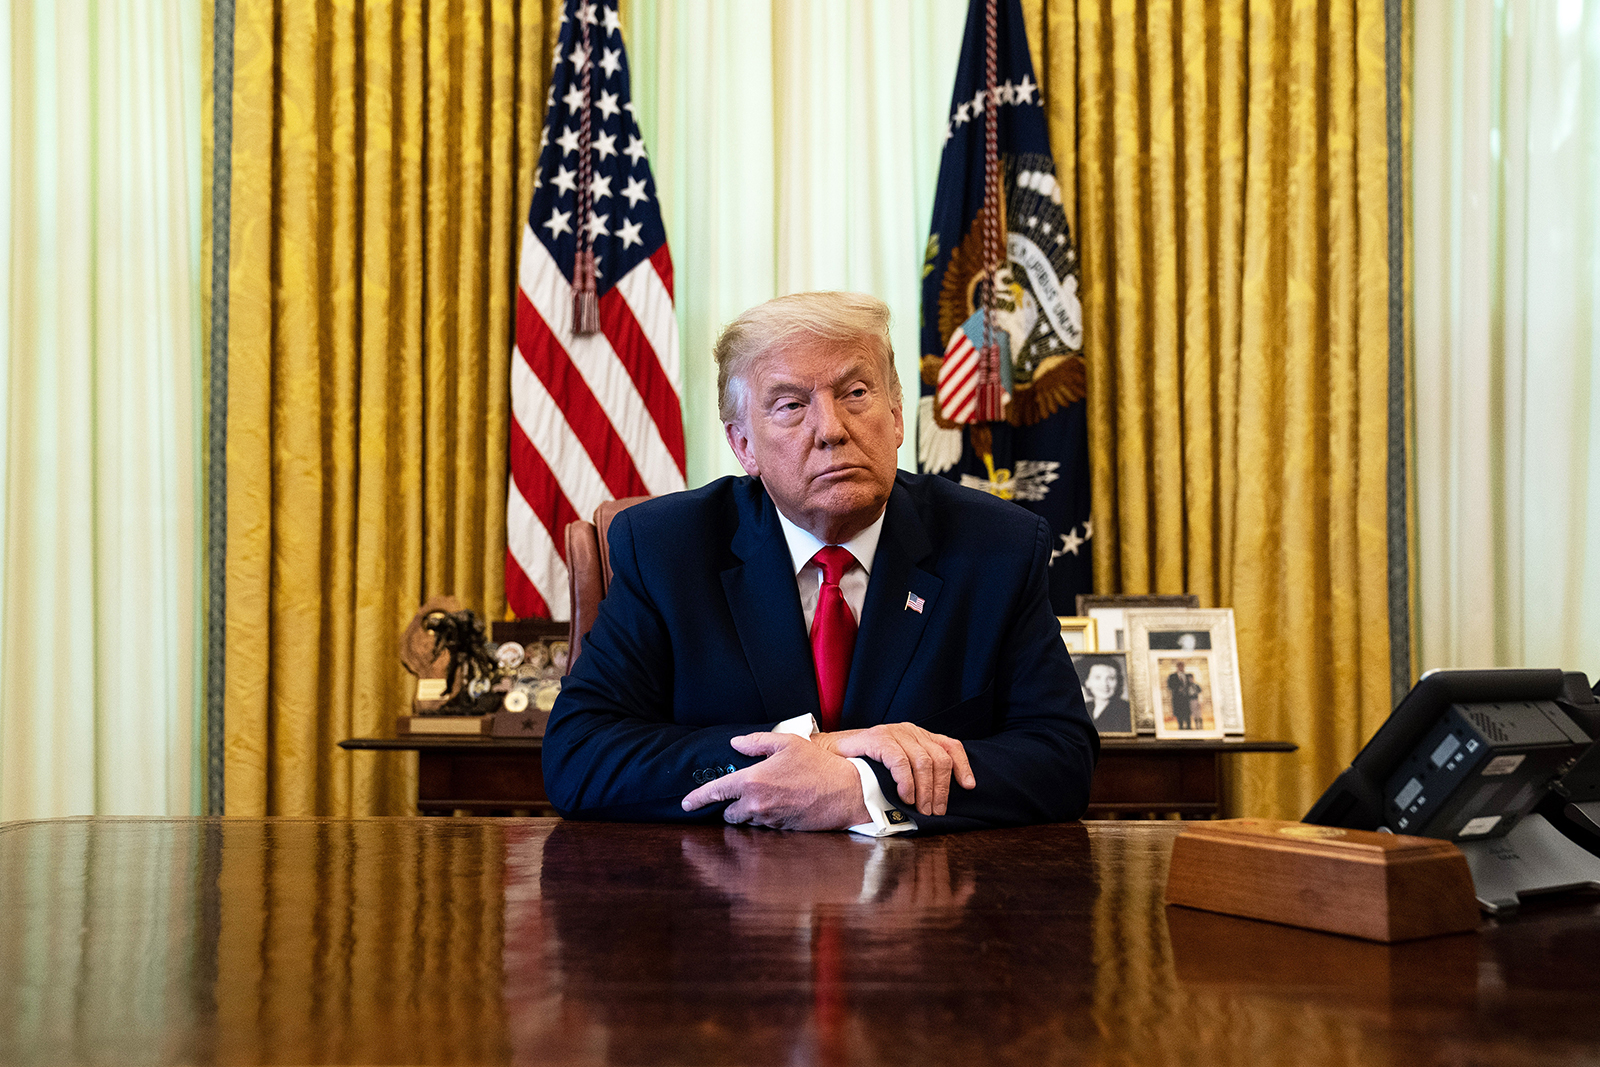 US President Donald Trump listens during an event in the Oval Office of the White House August 28, 2020 in Washington, DC.